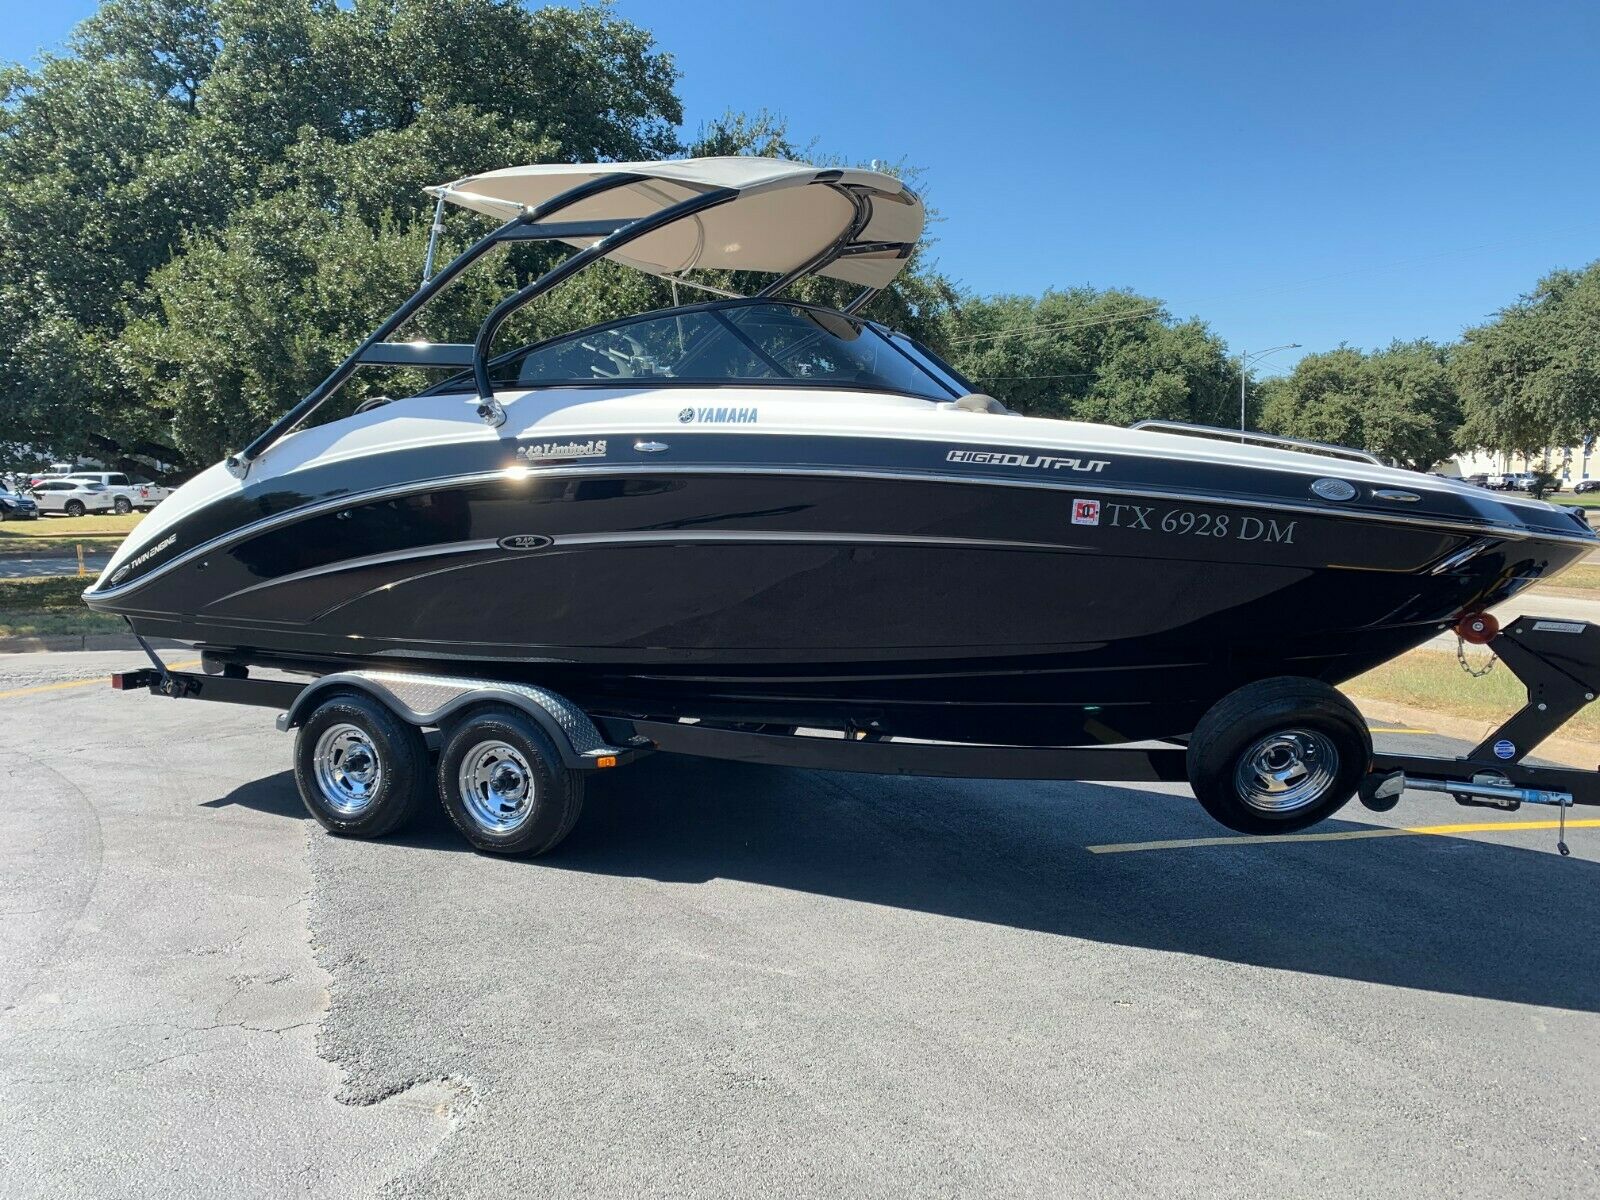 yamaha-242-limited-s-2014-for-sale-for-43-000-boats-from-usa